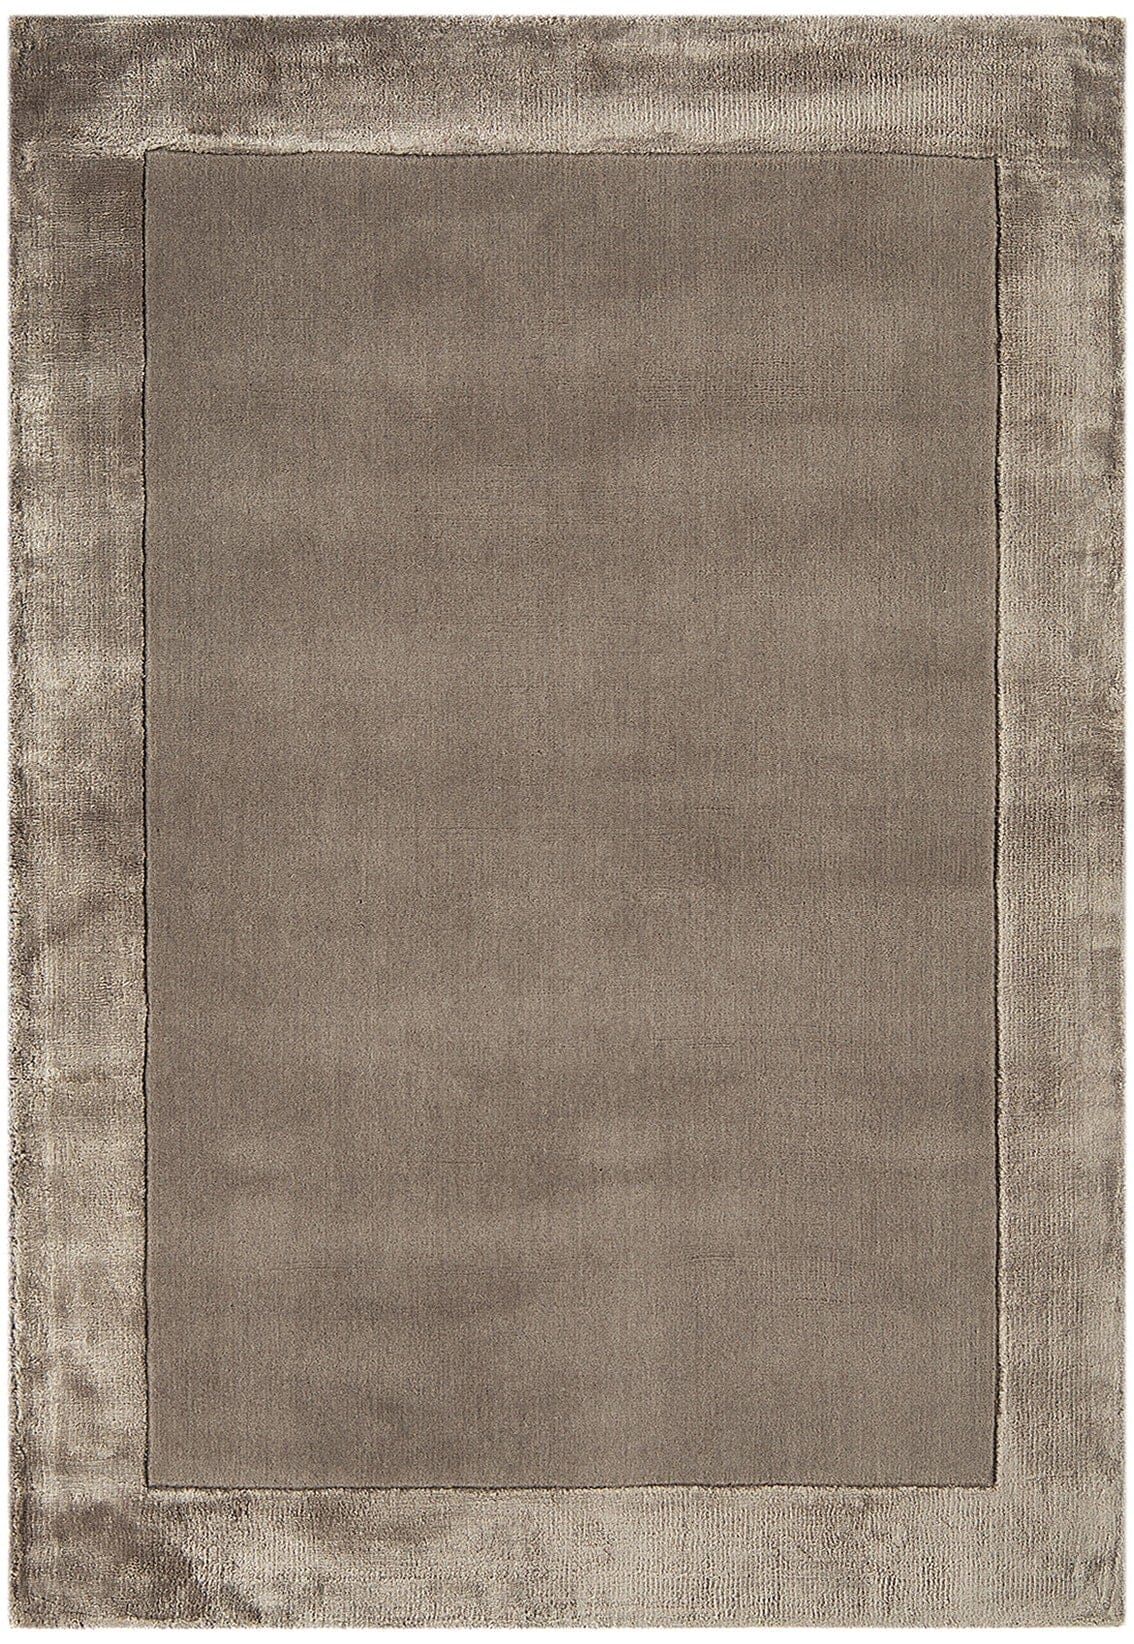  Asiatic Carpets-Asiatic Carpets Ascot Hand Woven Rug Taupe - 160 x 230cm-Beige, Natural 149 